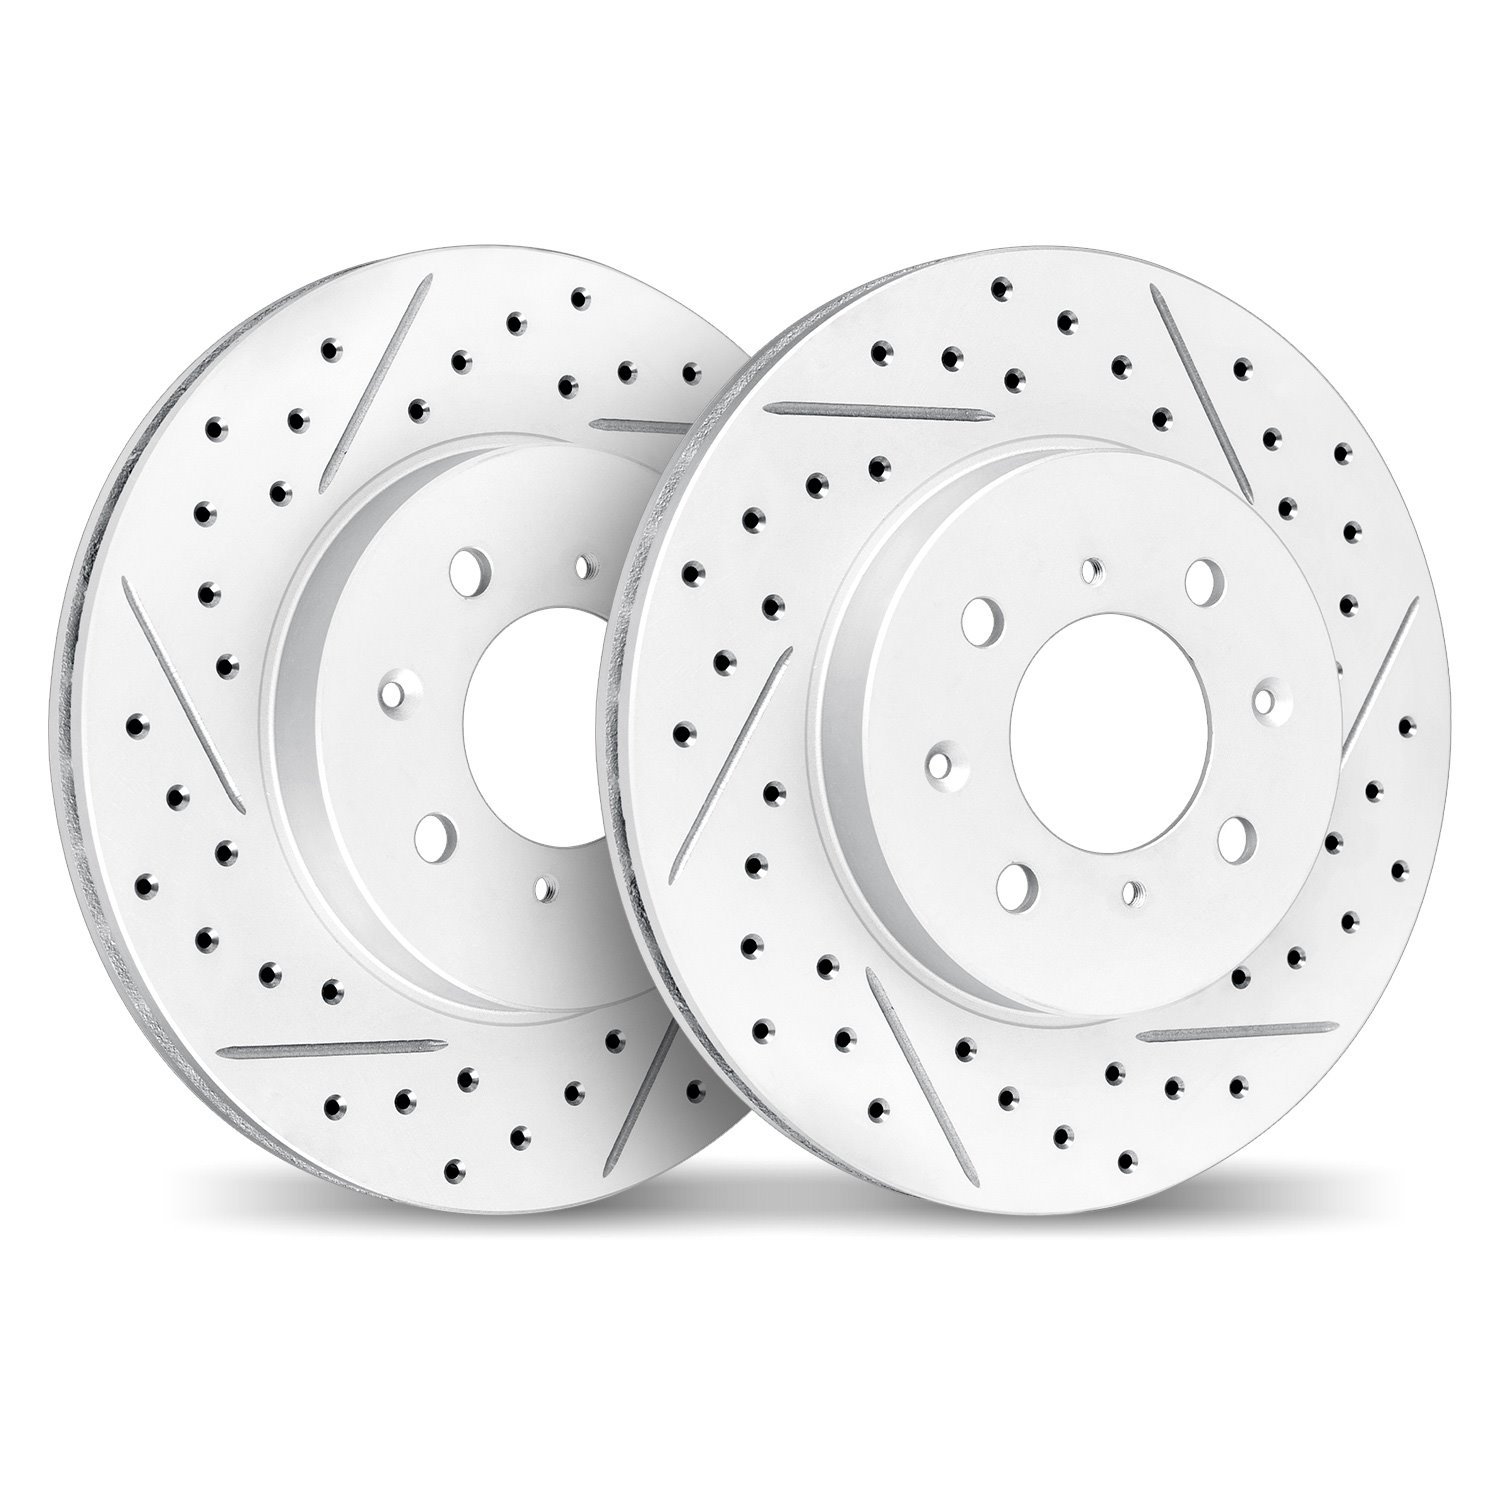 2002-53001 Geoperformance Drilled/Slotted Brake Rotors, 2003-2010 GM, Position: Front